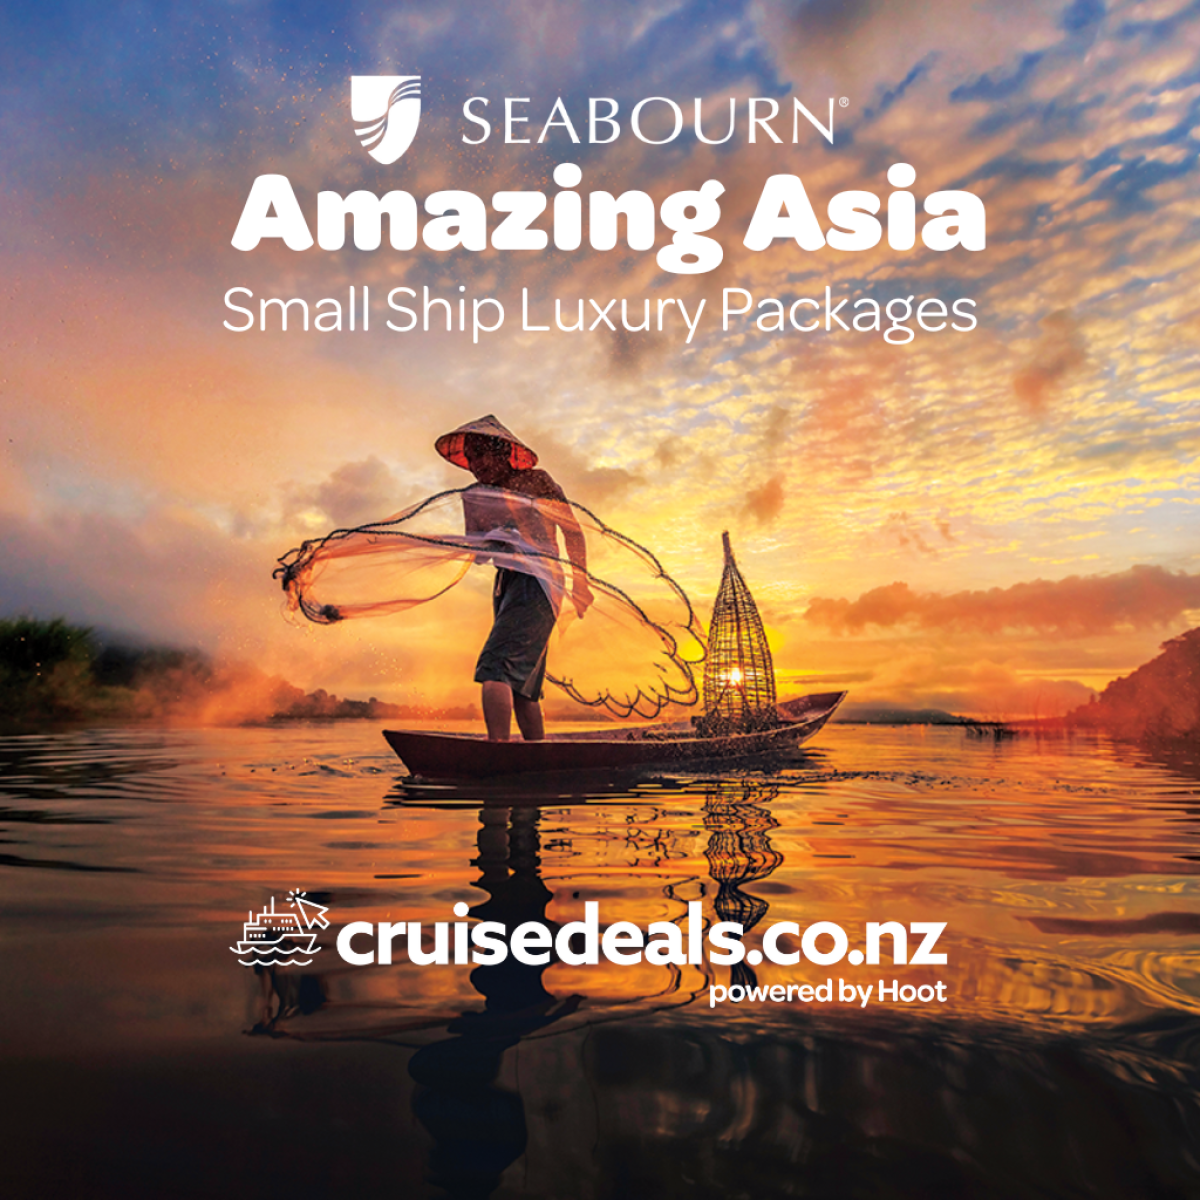 Seabourn Amazing Asia Luxury Packages